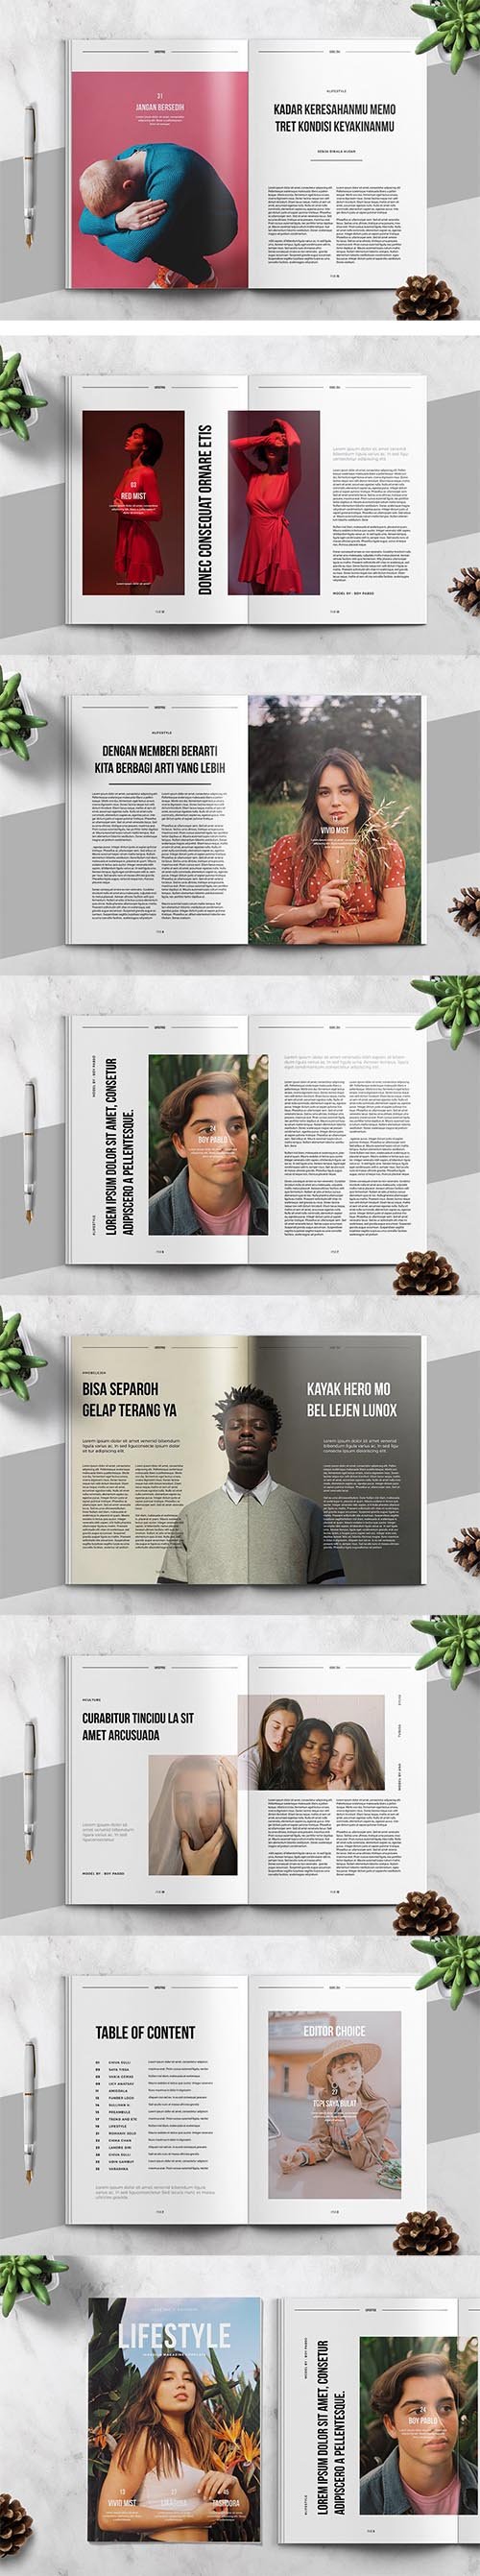 LIFESTYLE - Magazine Template INDD